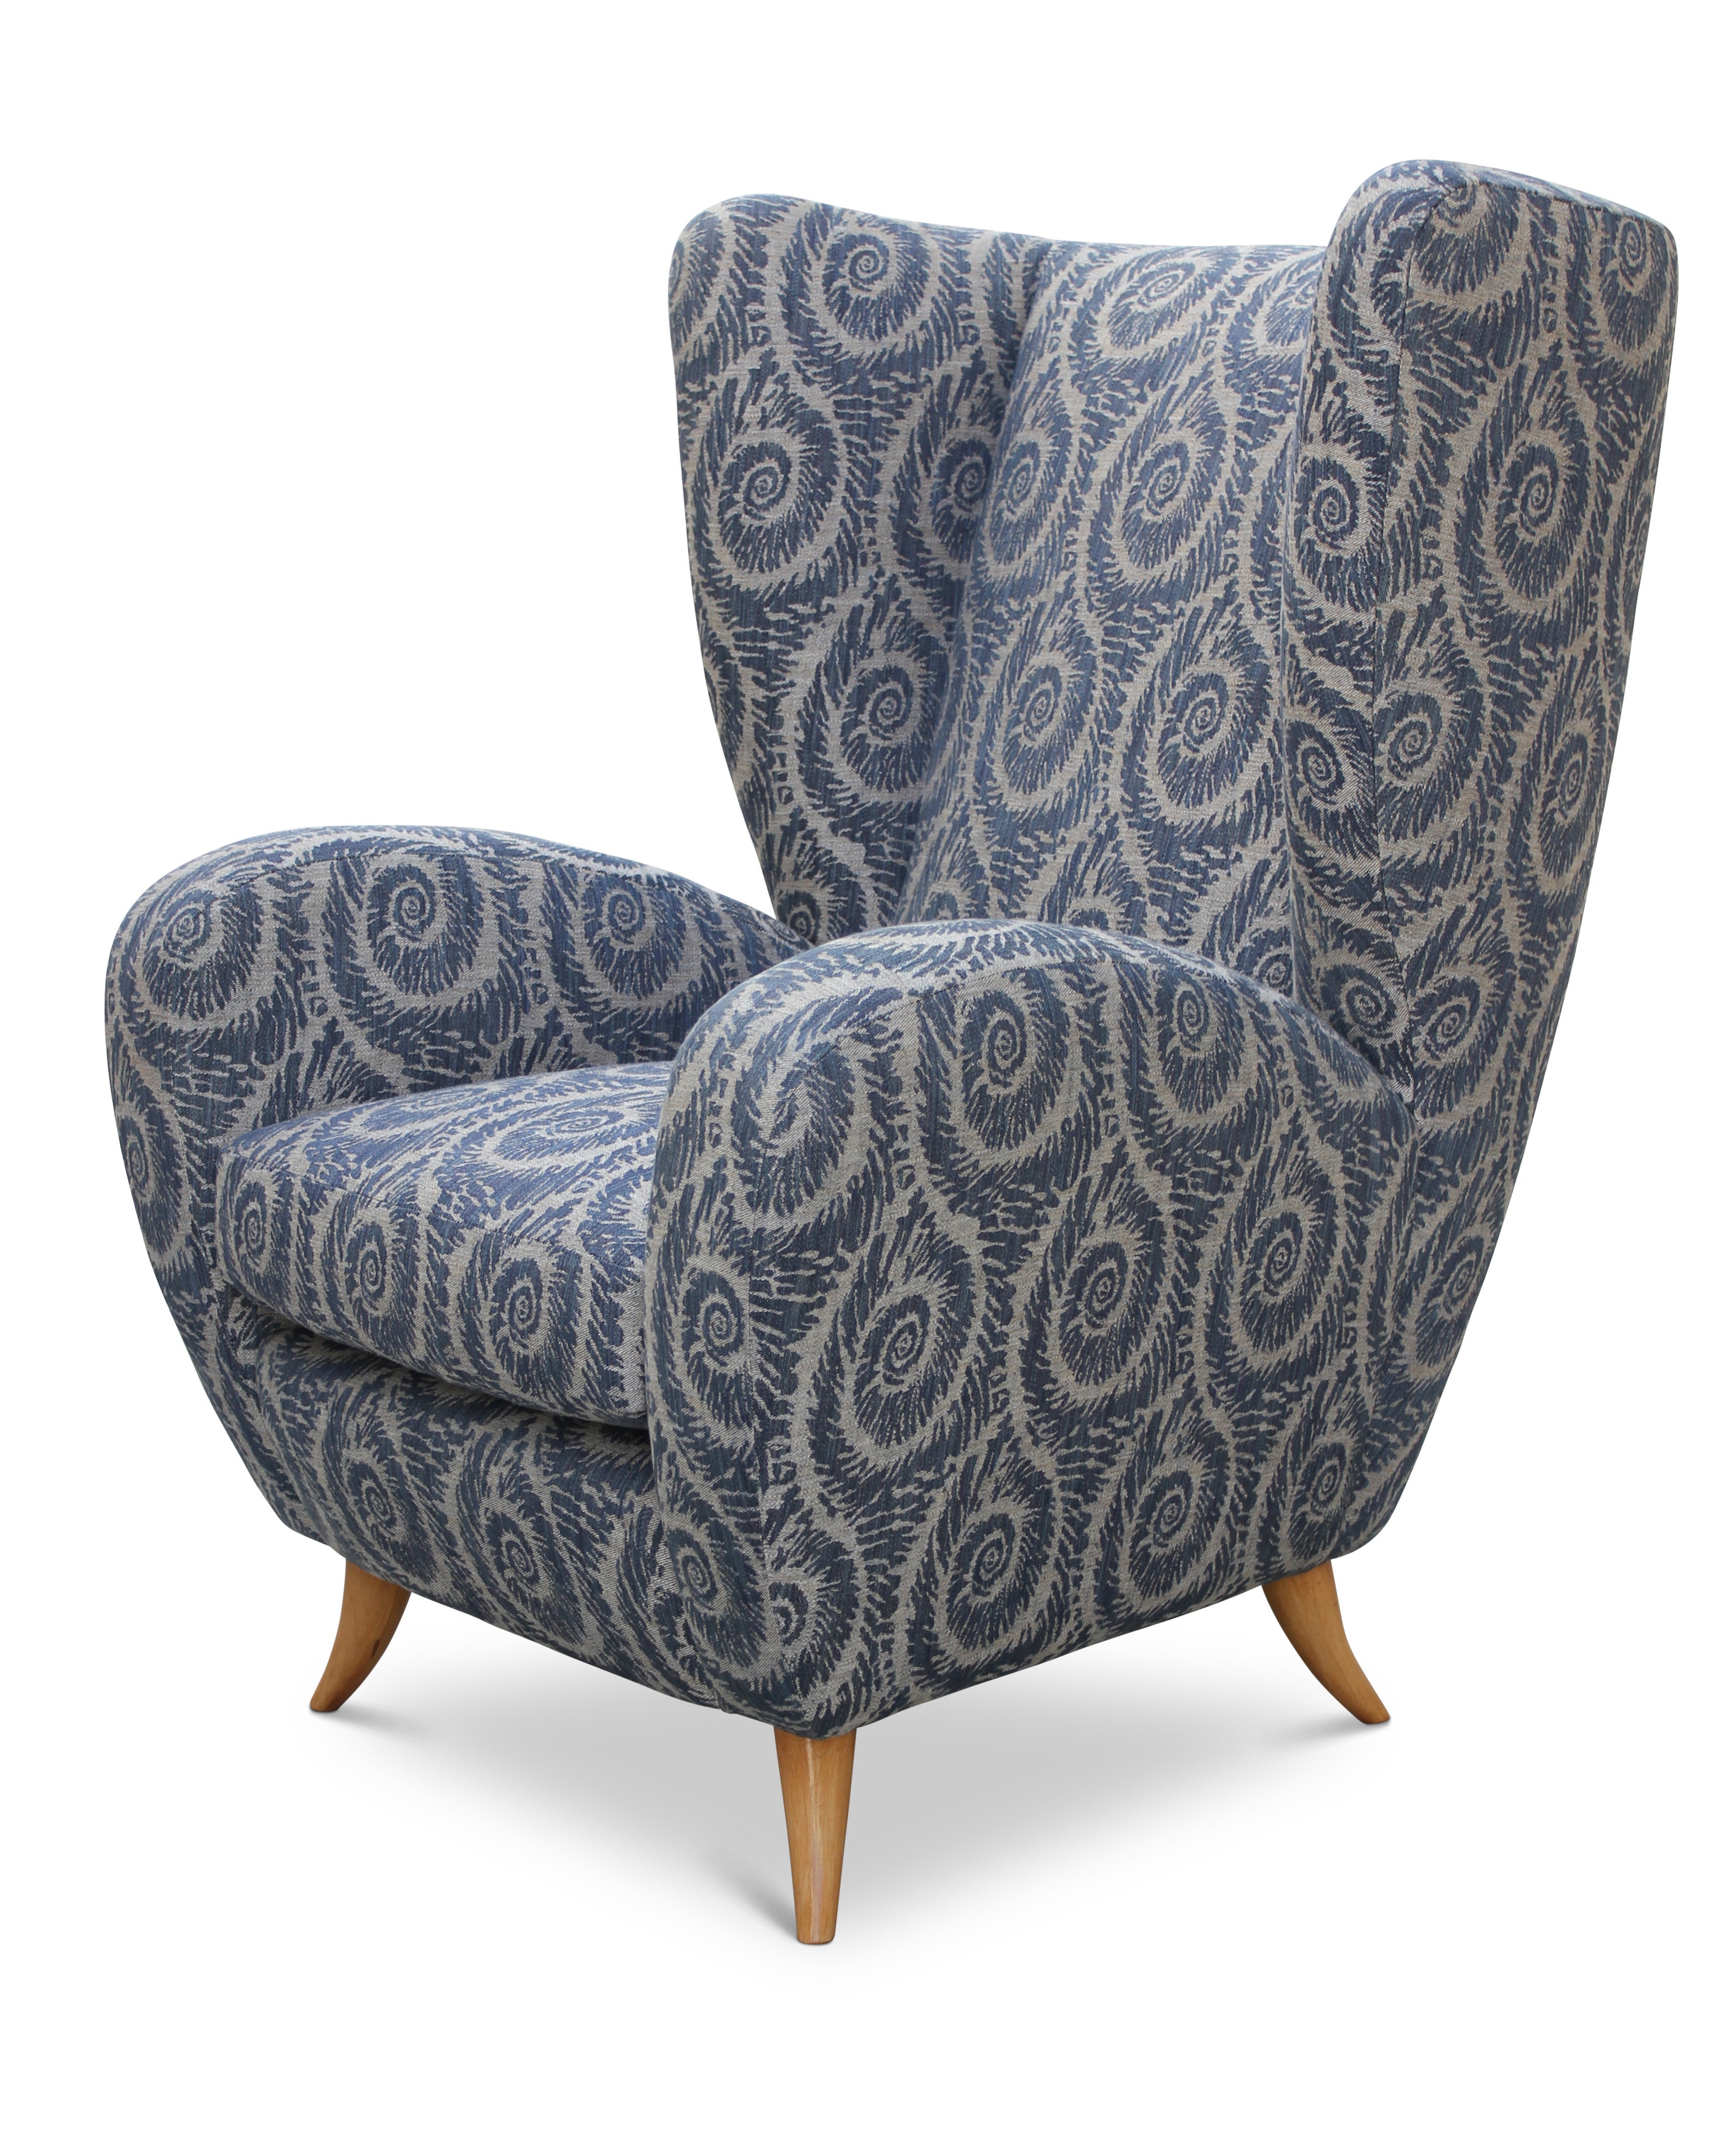 Downtown Classics Collection Forte Chair For Sale